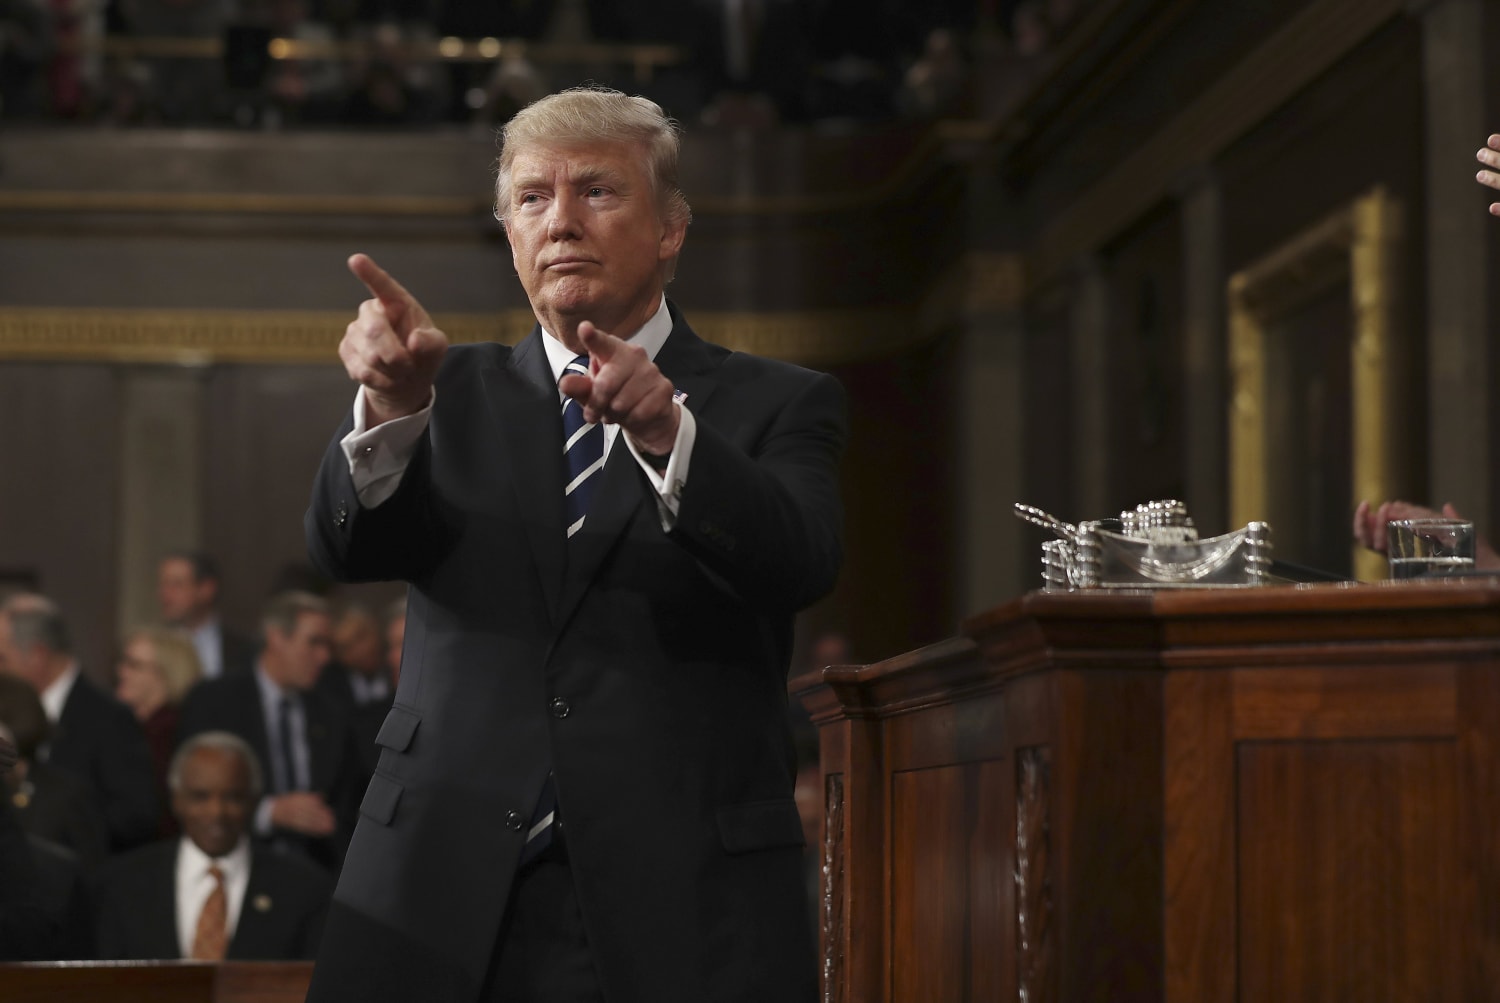 Trump's Address to Congress: Here's What Foreign Press Made of It